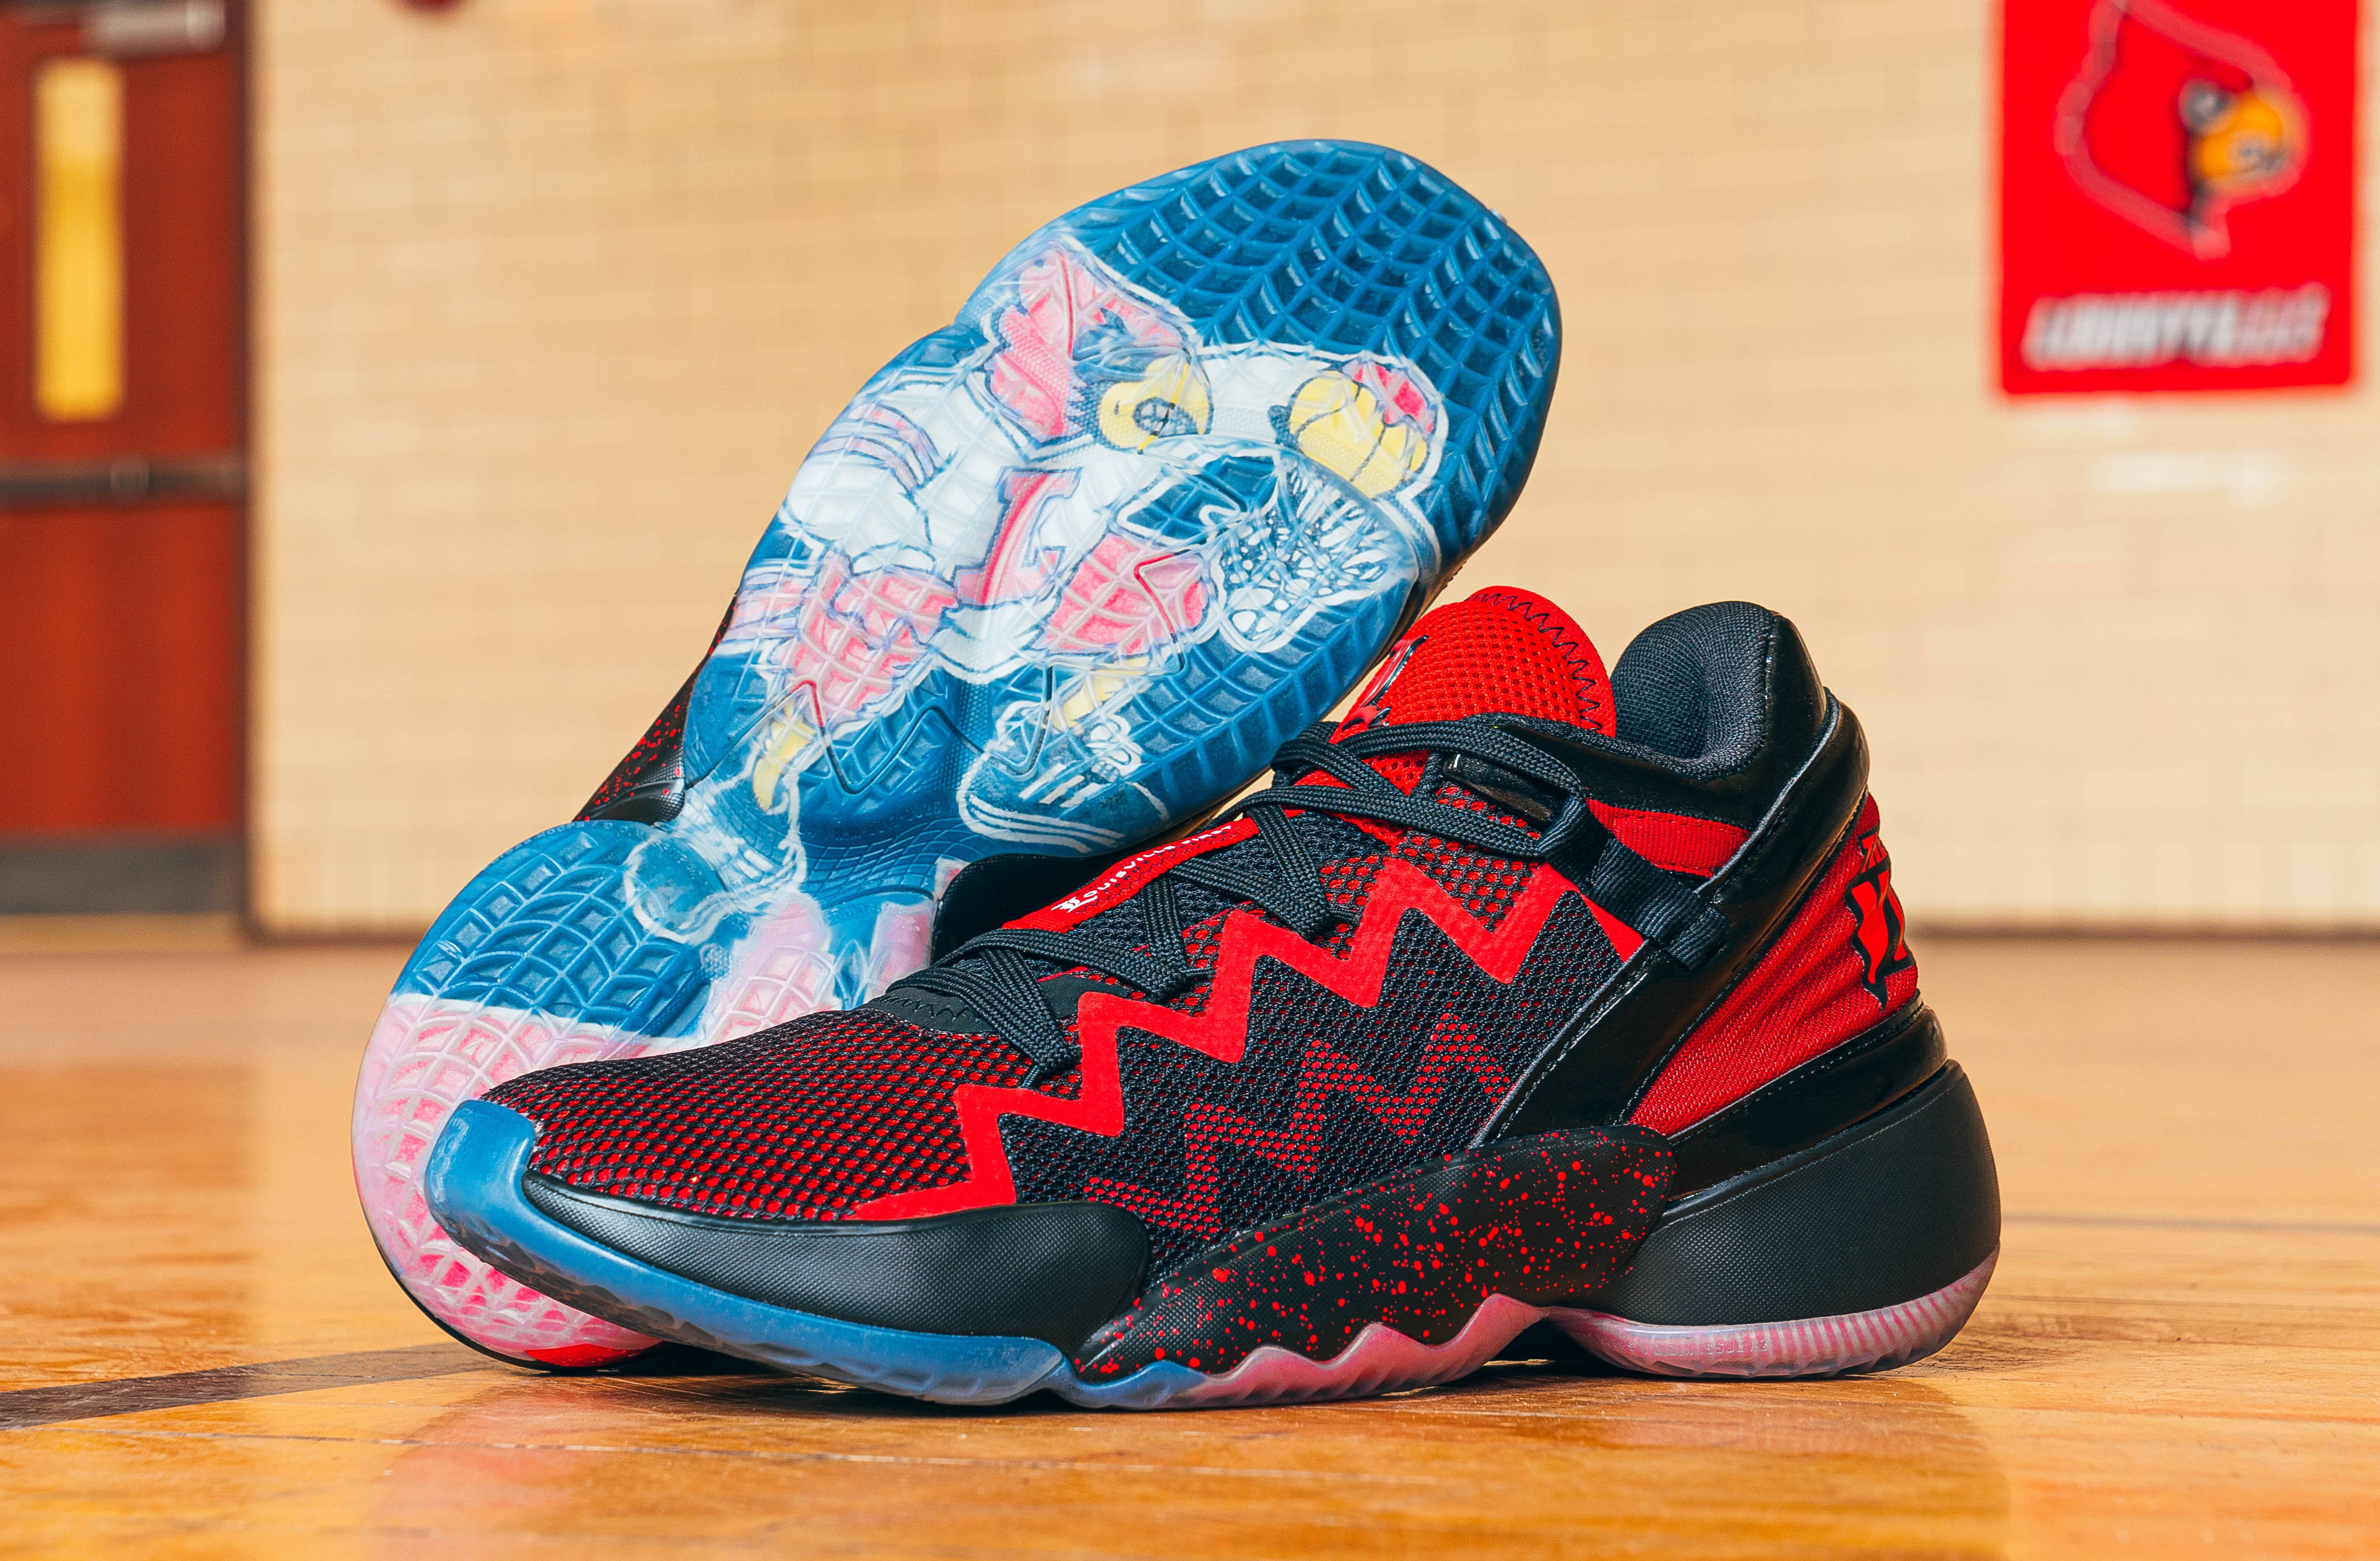 adidas Reveals Donovan Mitchell's D.O.N. Issue #2